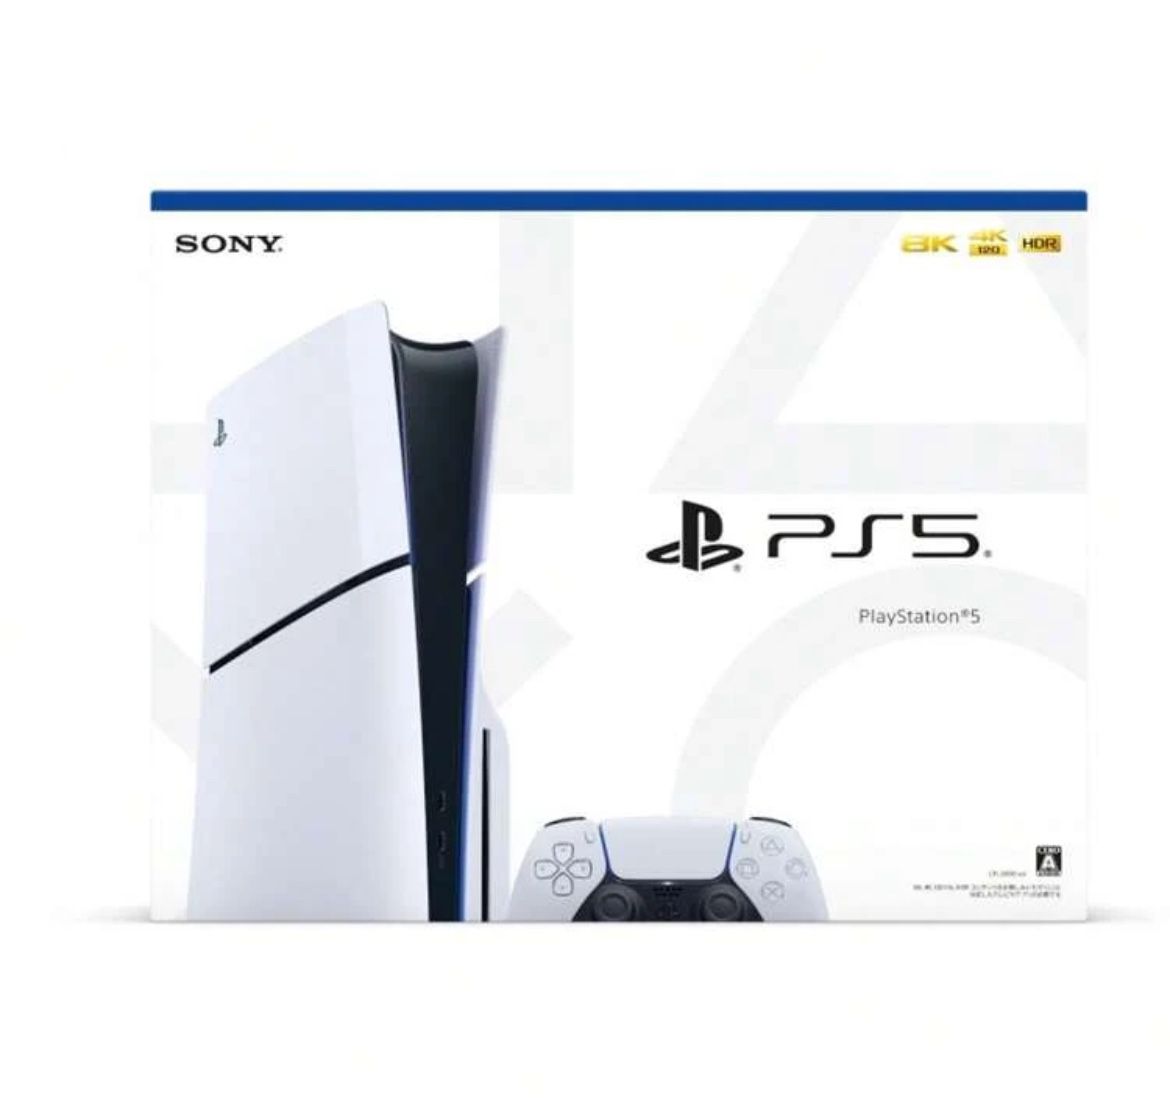 Sony PlayStation®5 Console (Slim) Japan - Disk - Brand New